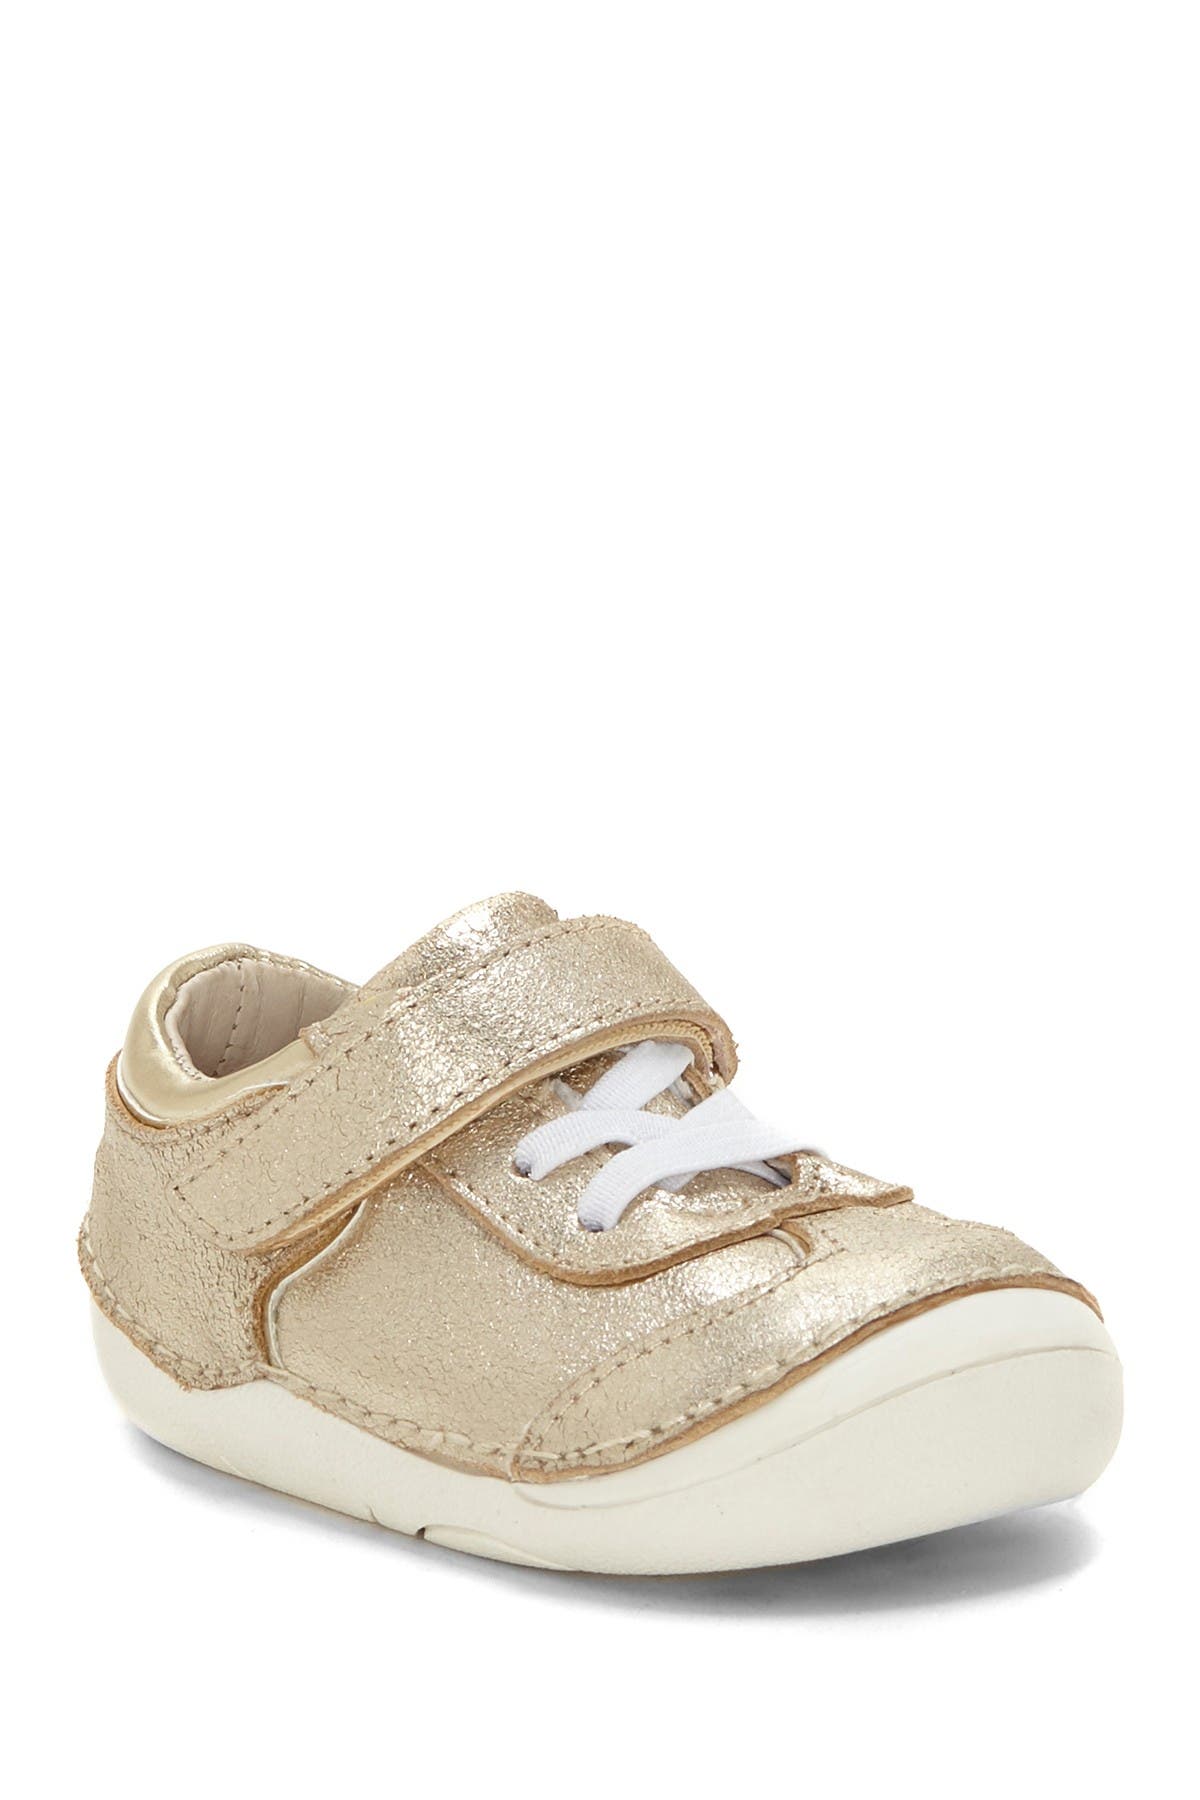 sole play kids shoes